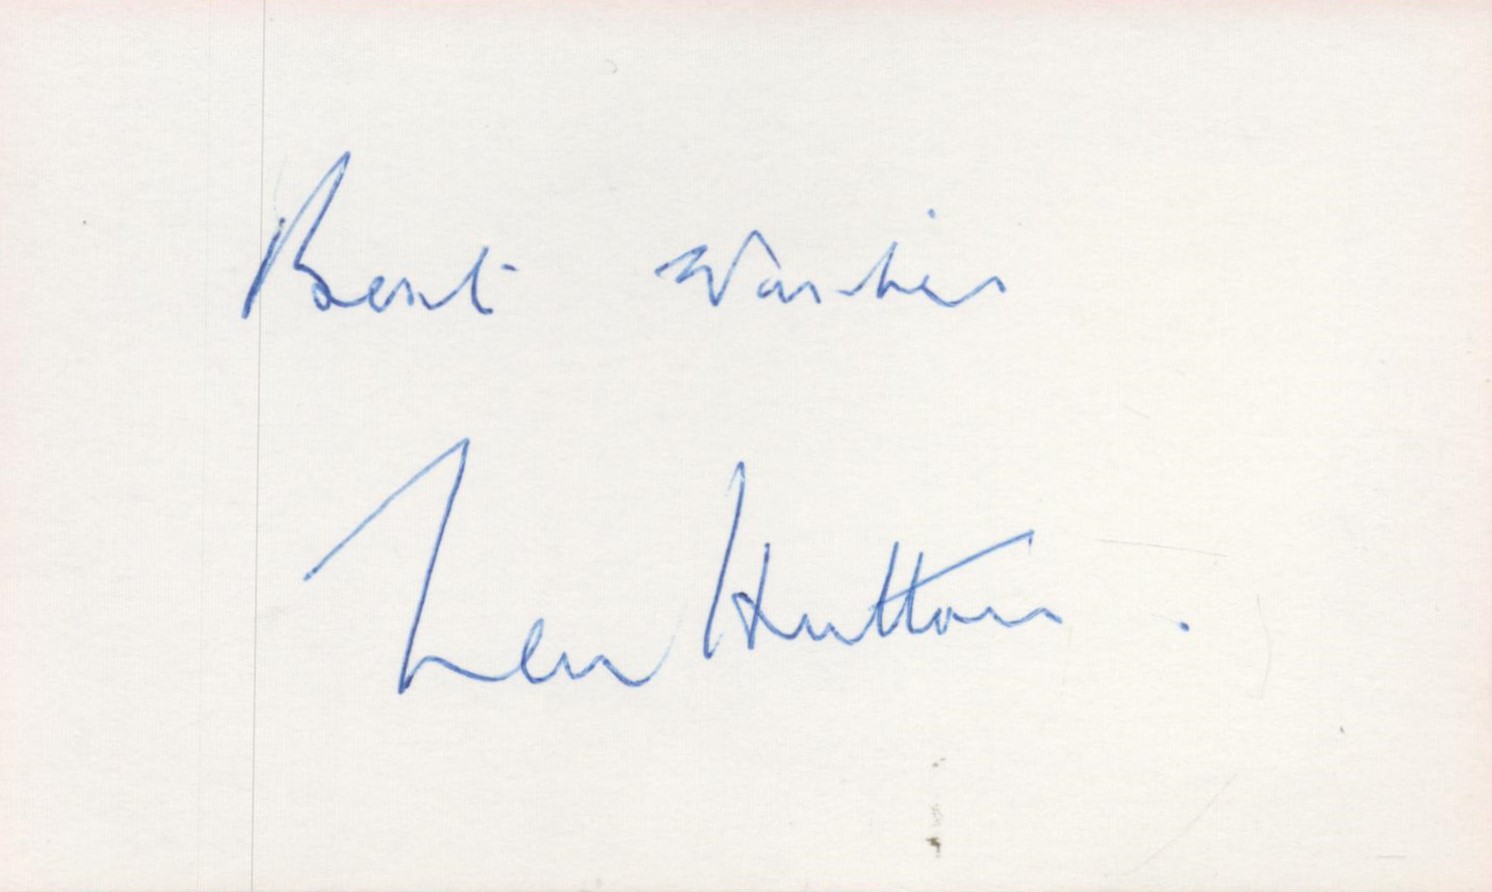 English Cricket Star Sir Len Hutton Signed 5x3 inch White Signature Card. Signed in blue ink. Good